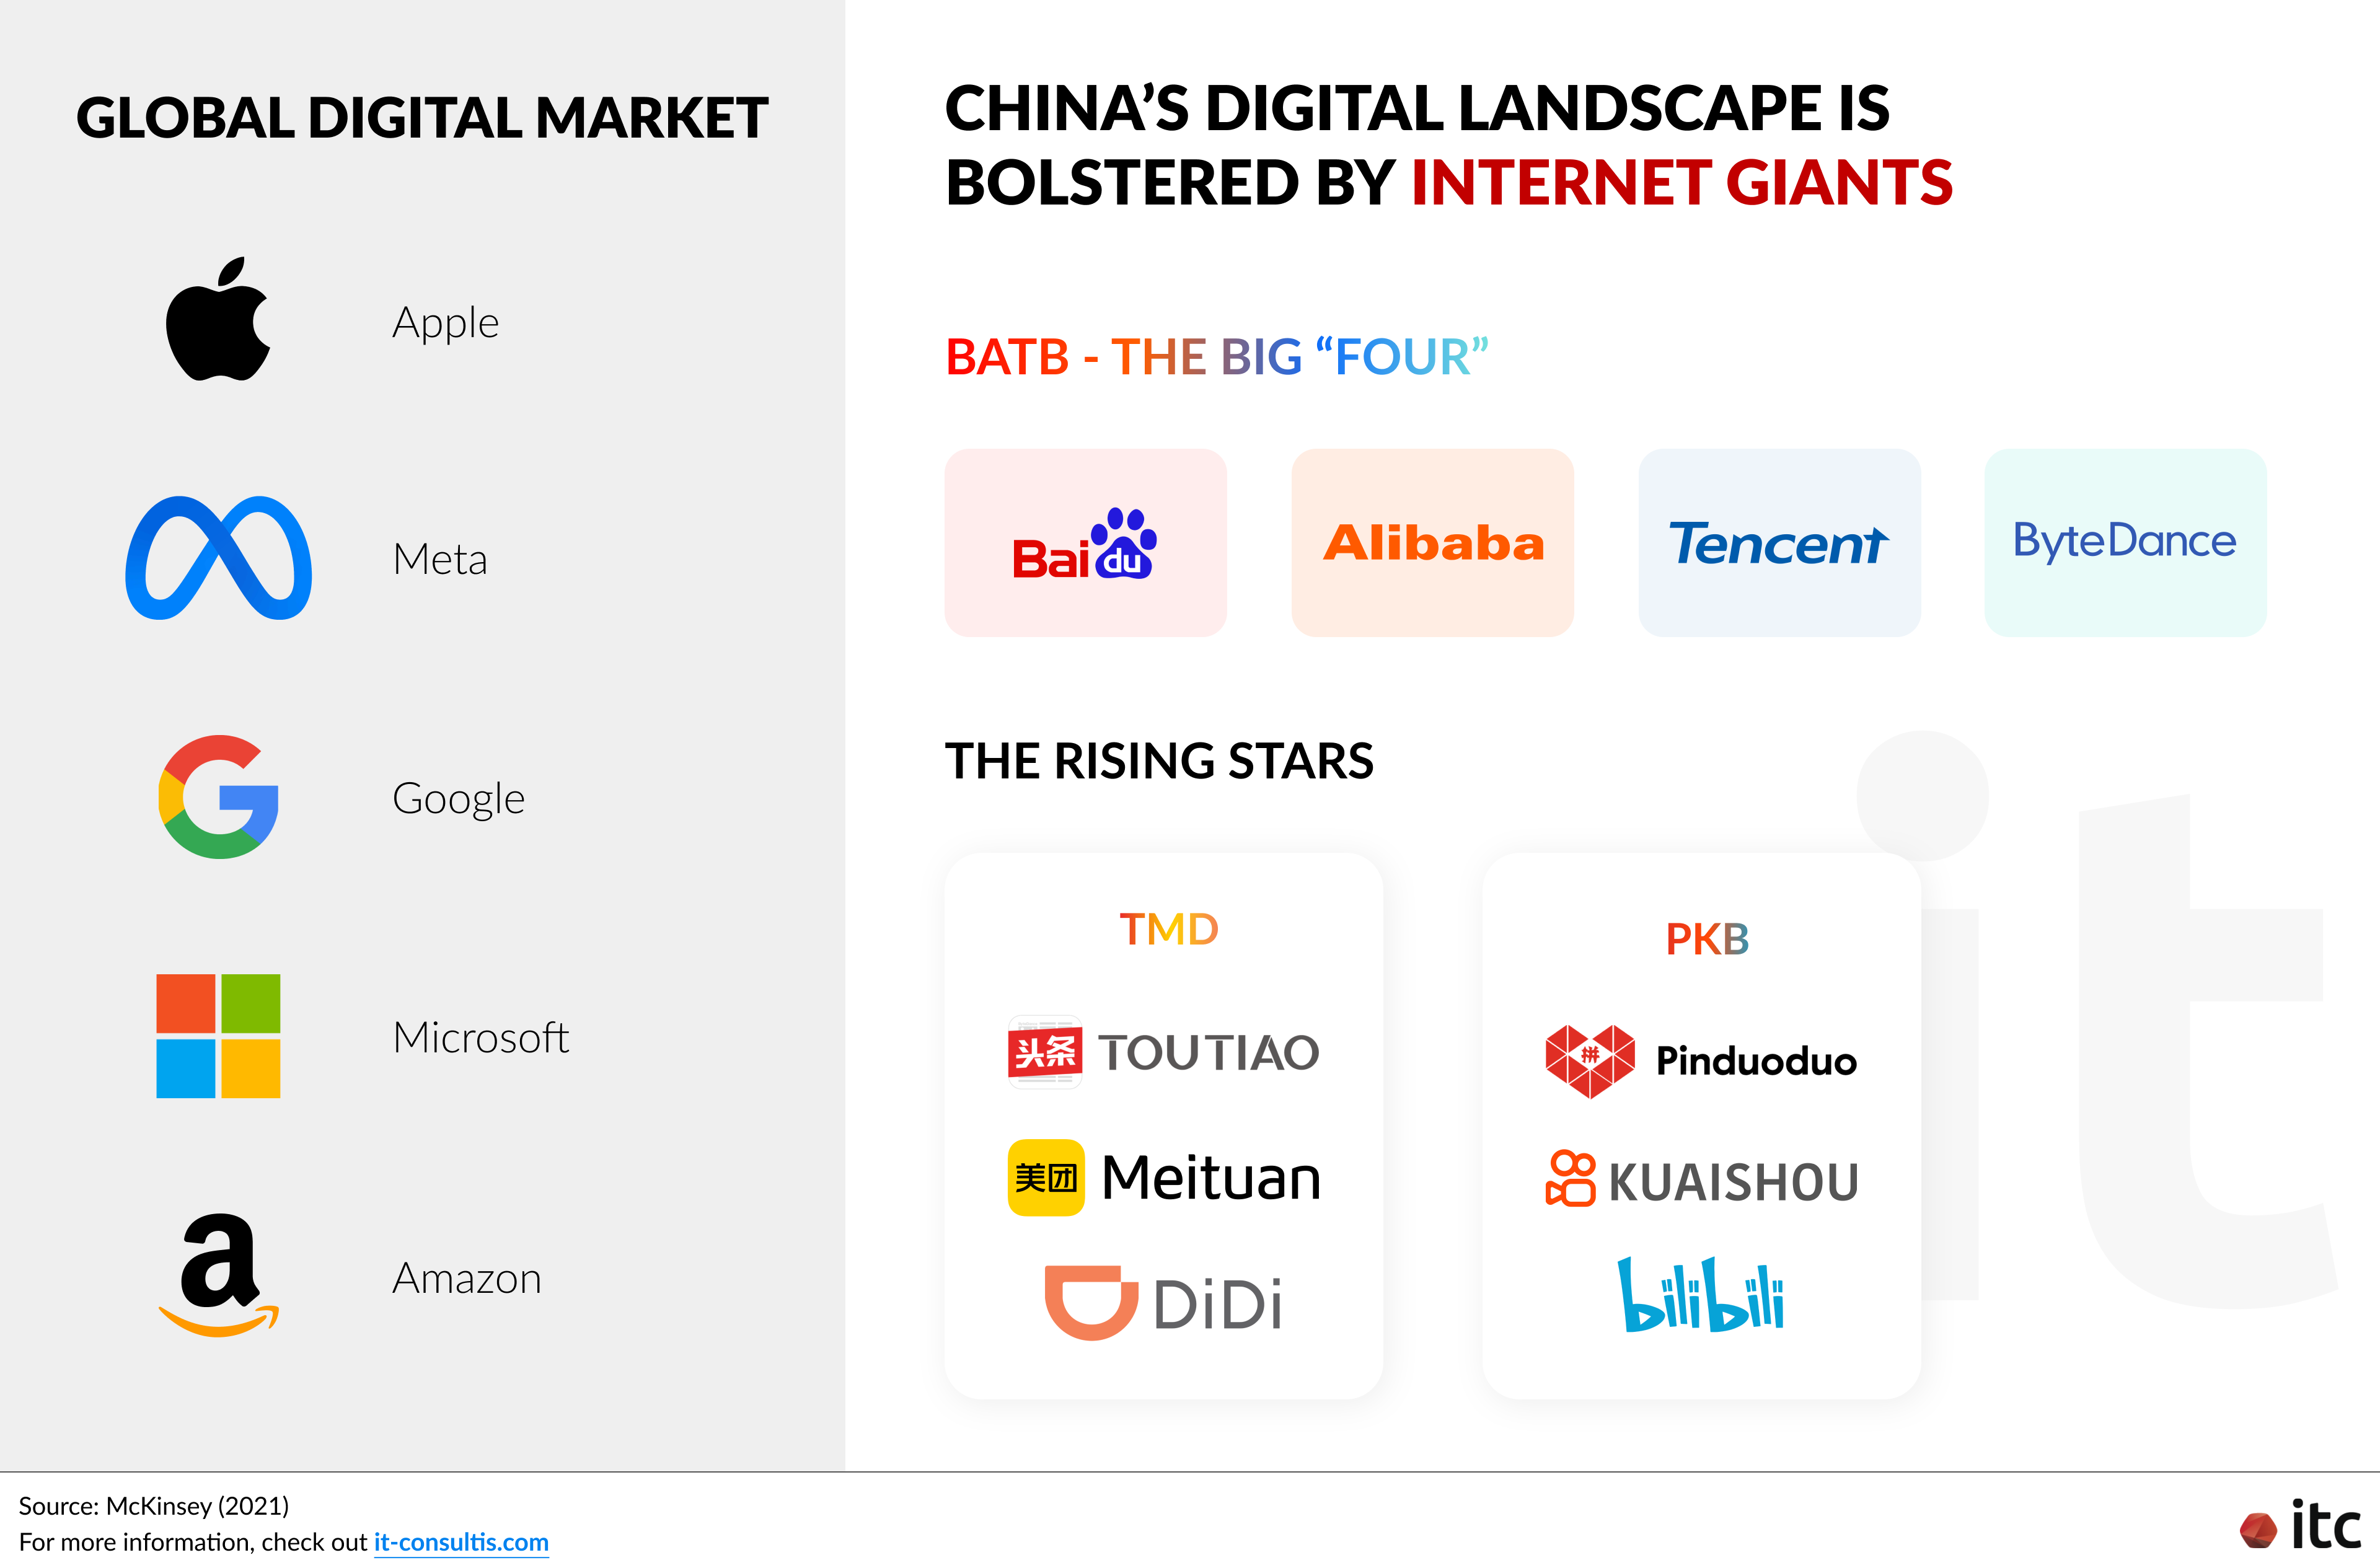 China's digital landscape is bolstered by internet giants BATB - The big "four" (Baidu, Alibaba, Tencent, and ByteDance)